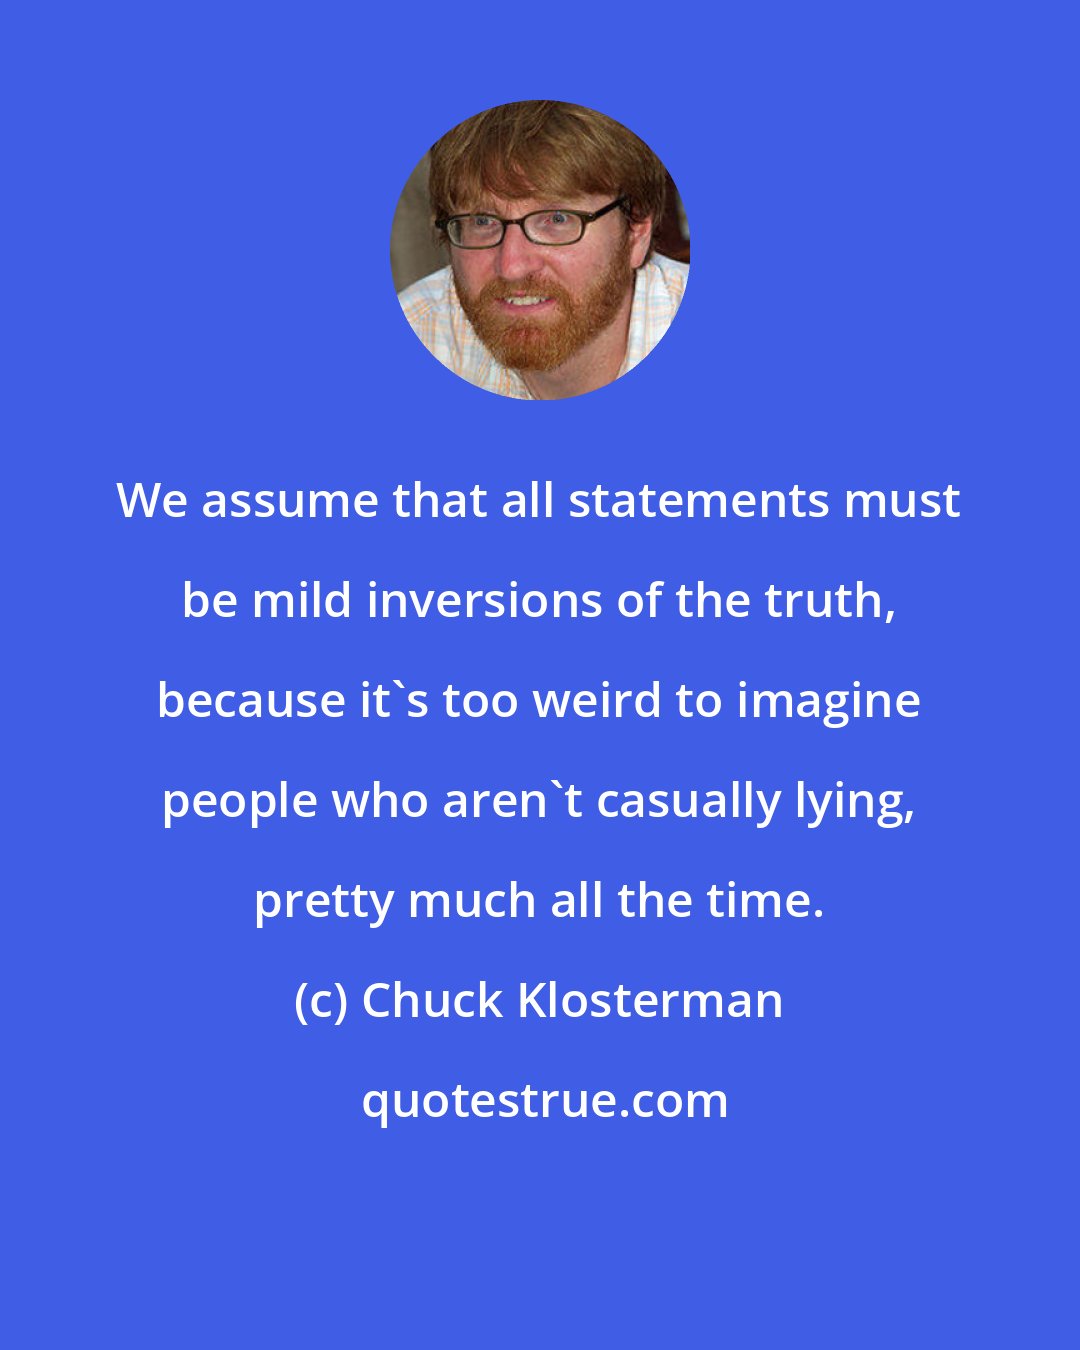 Chuck Klosterman: We assume that all statements must be mild inversions of the truth, because it's too weird to imagine people who aren't casually lying, pretty much all the time.